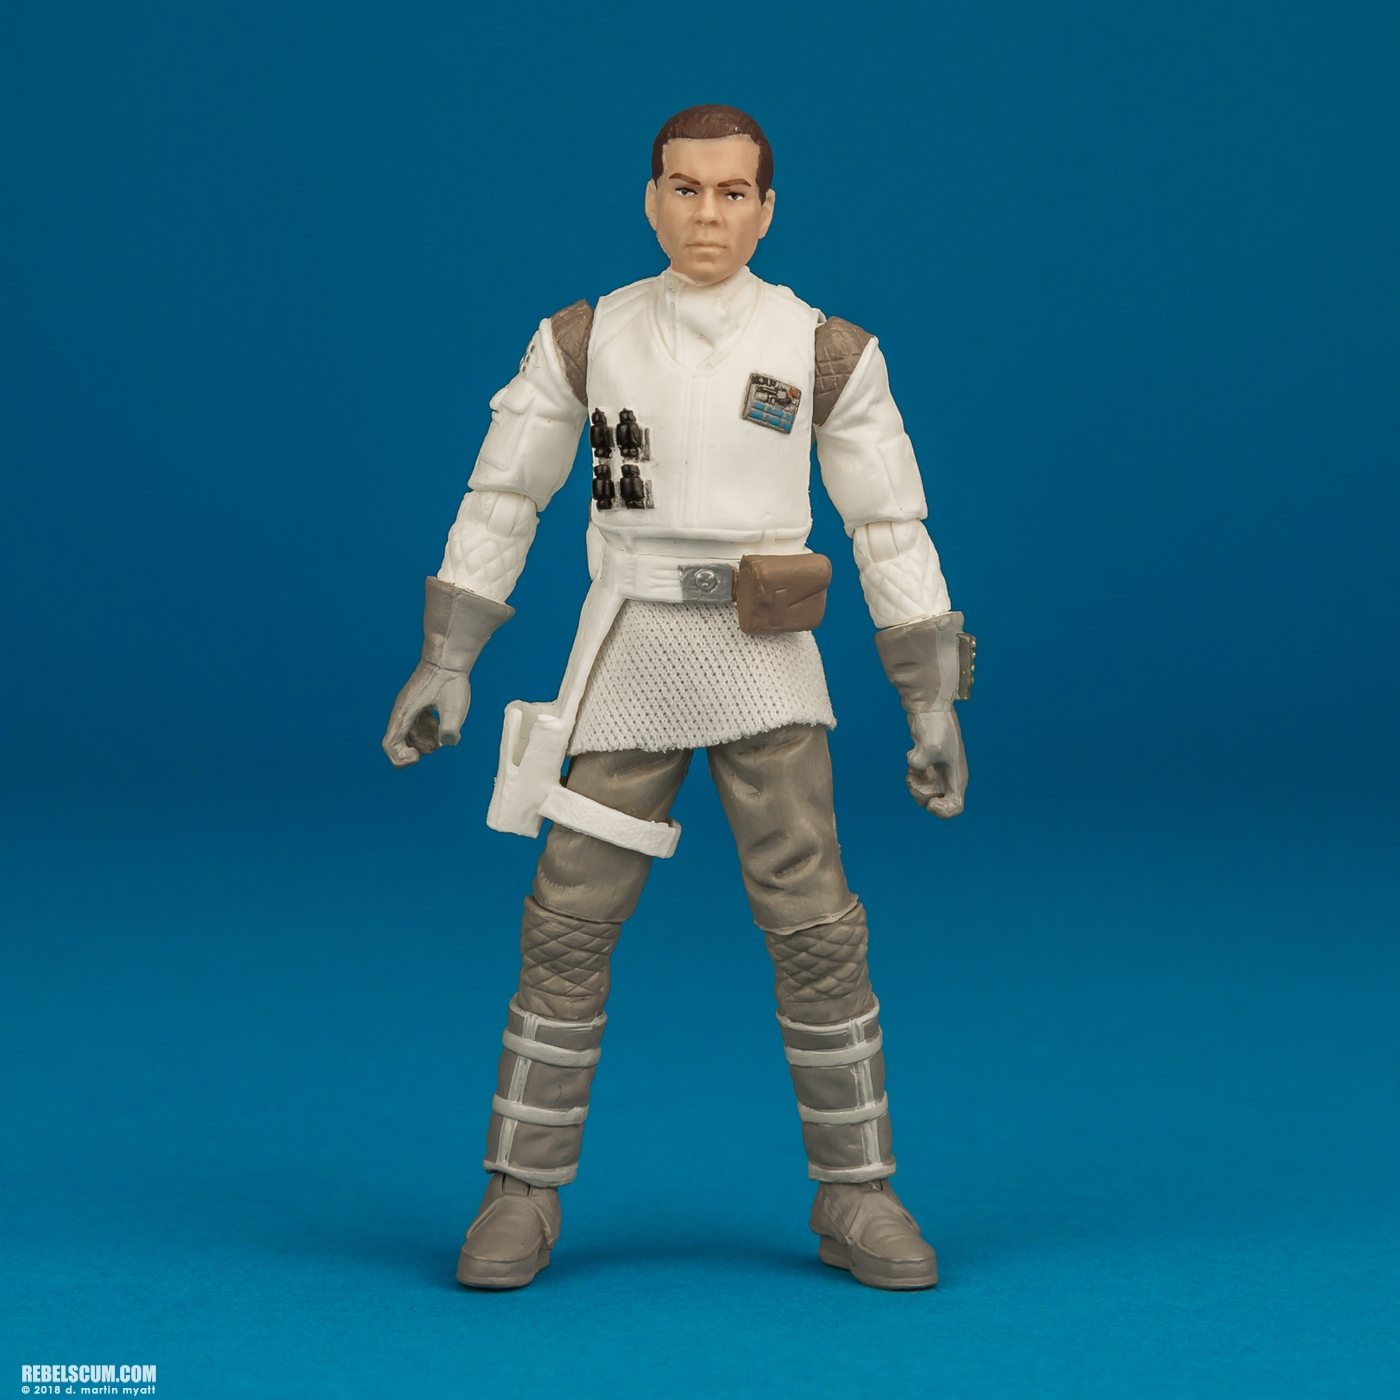 VC120-Rebel-Soldier-Hoth-The-Vintage-Collection-Hasbro-001.jpg